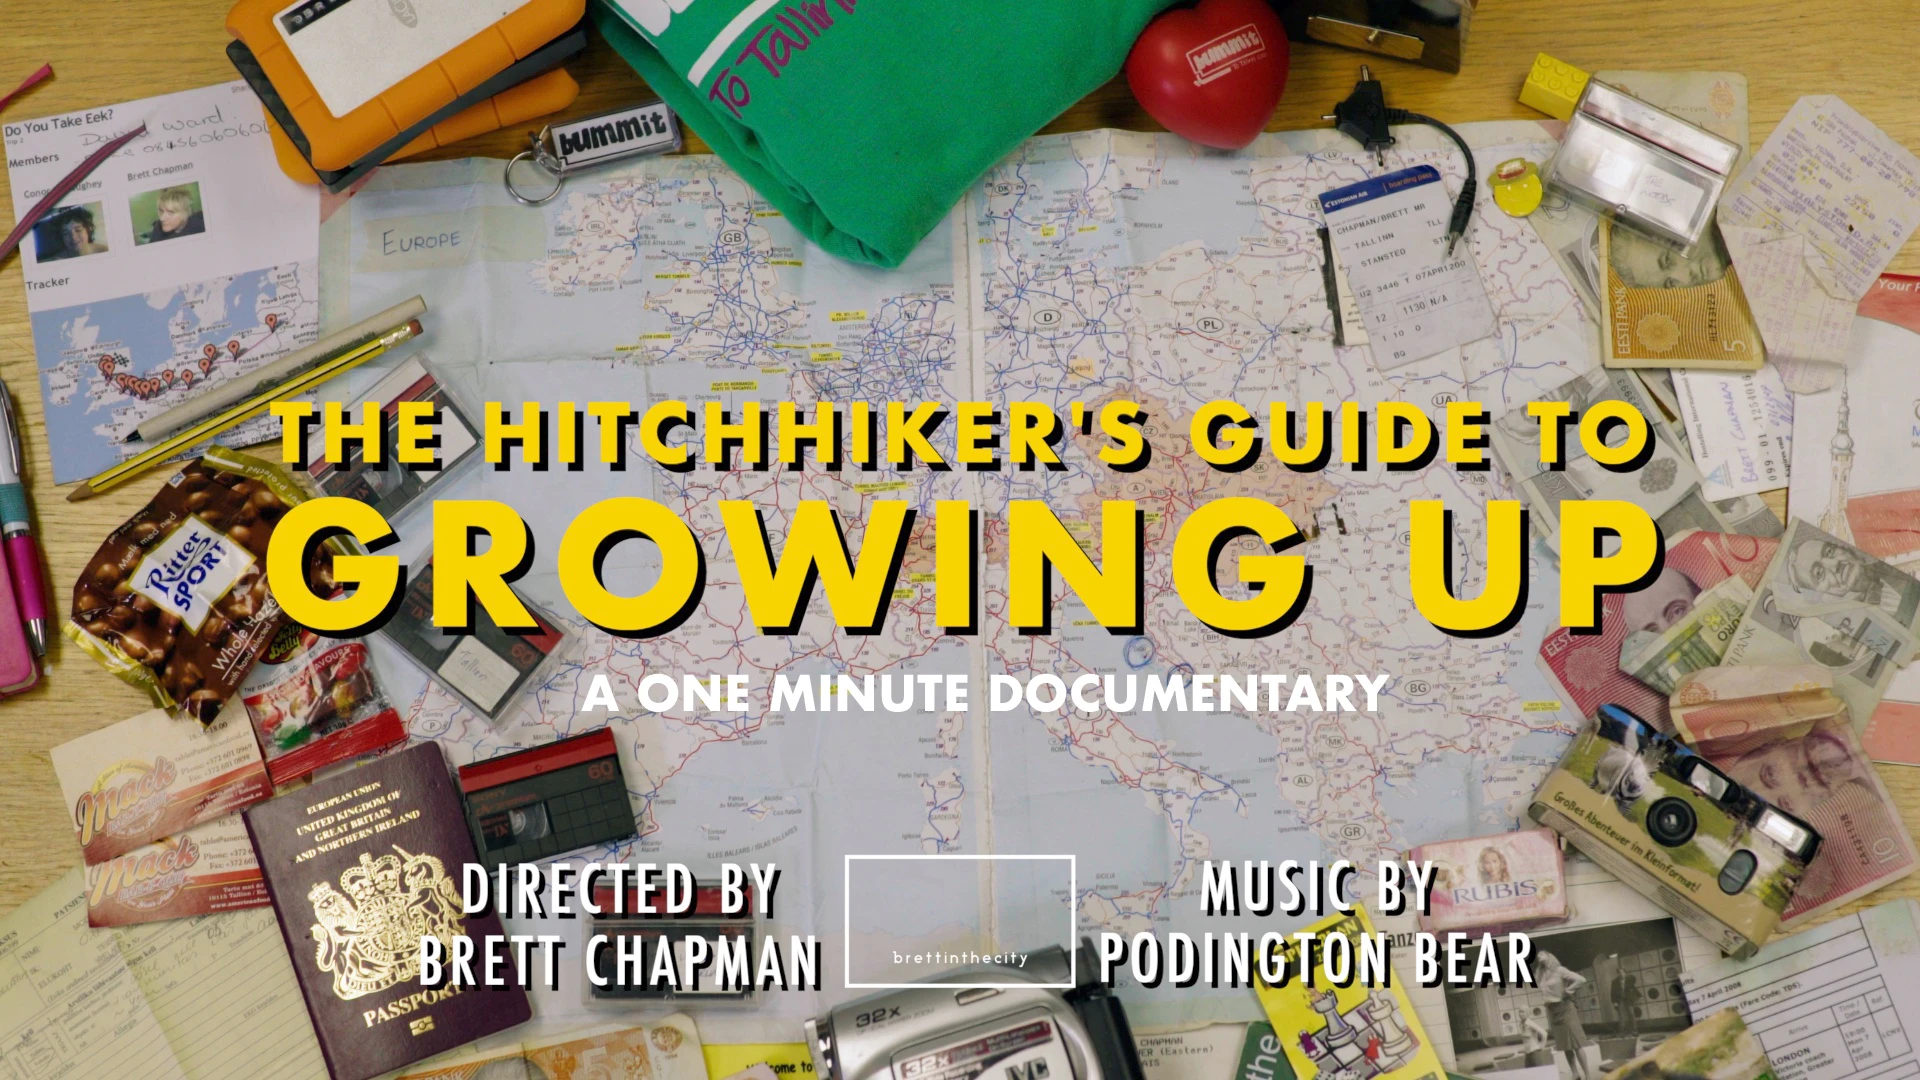 The Hitchhiker's Guide To Growing Up #passion